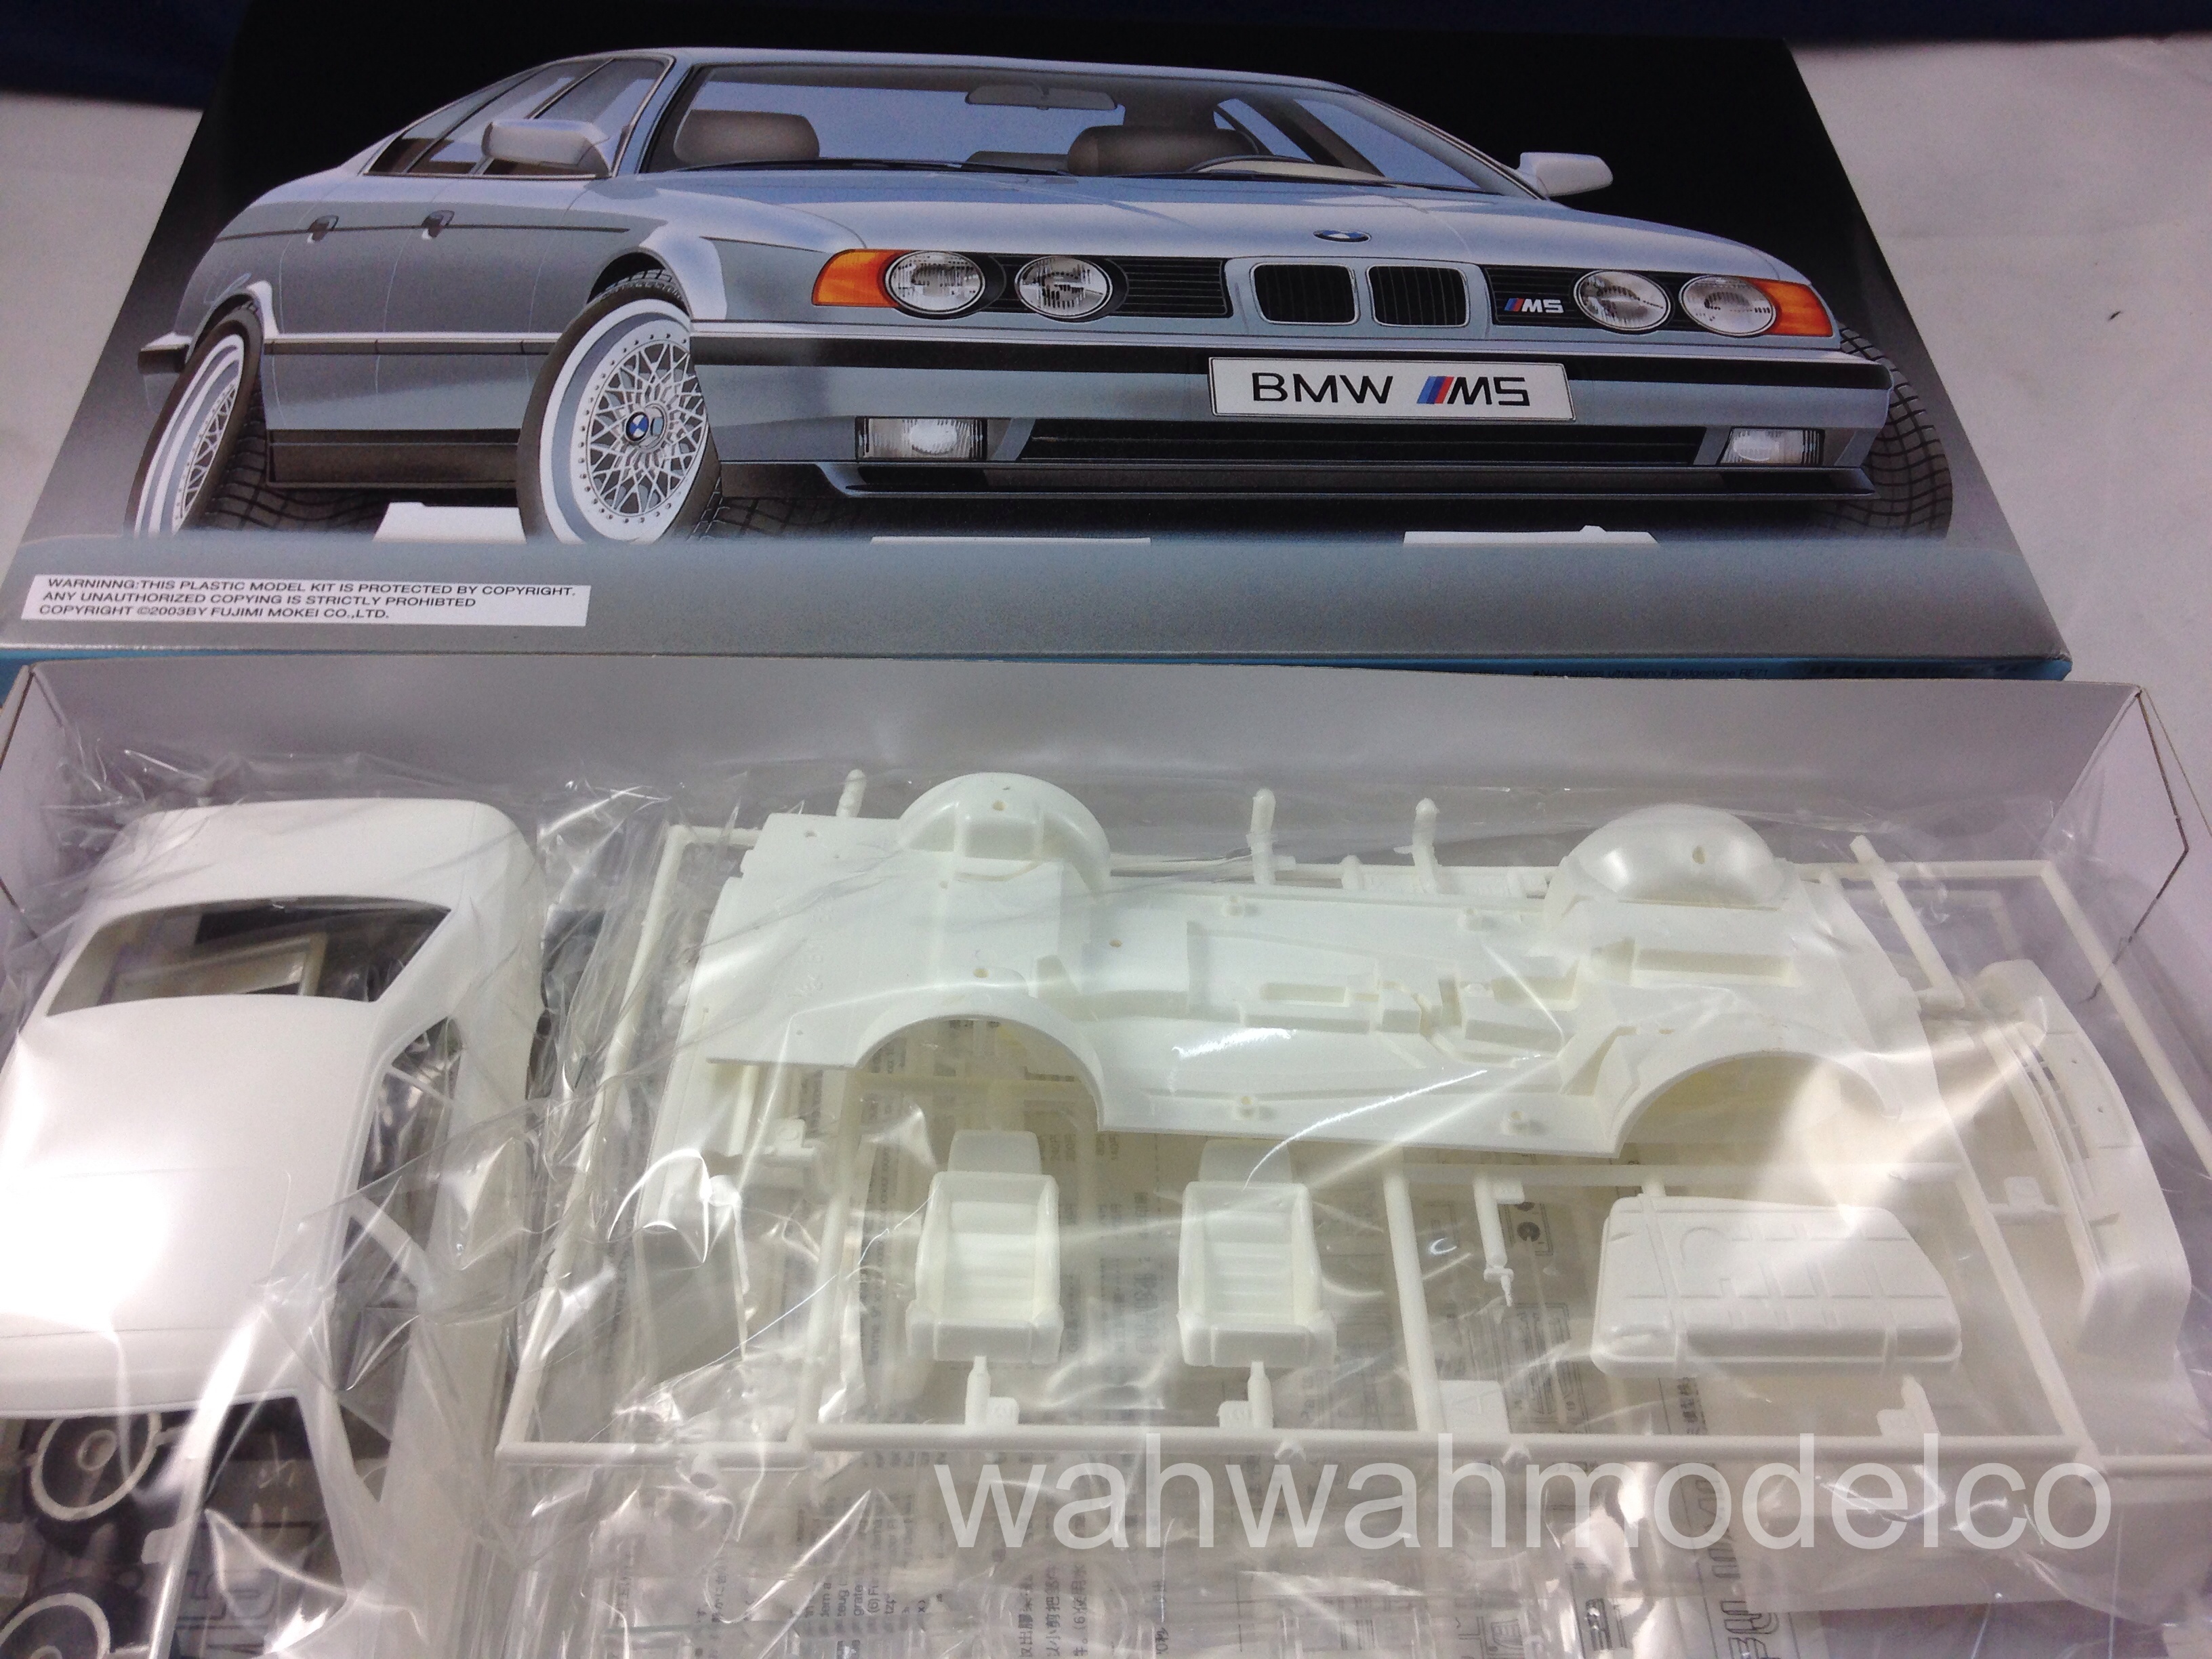 Fujimi RS-34 1/24 BMW M5 w/tracking# From JAPAN Free Shipping NEW 